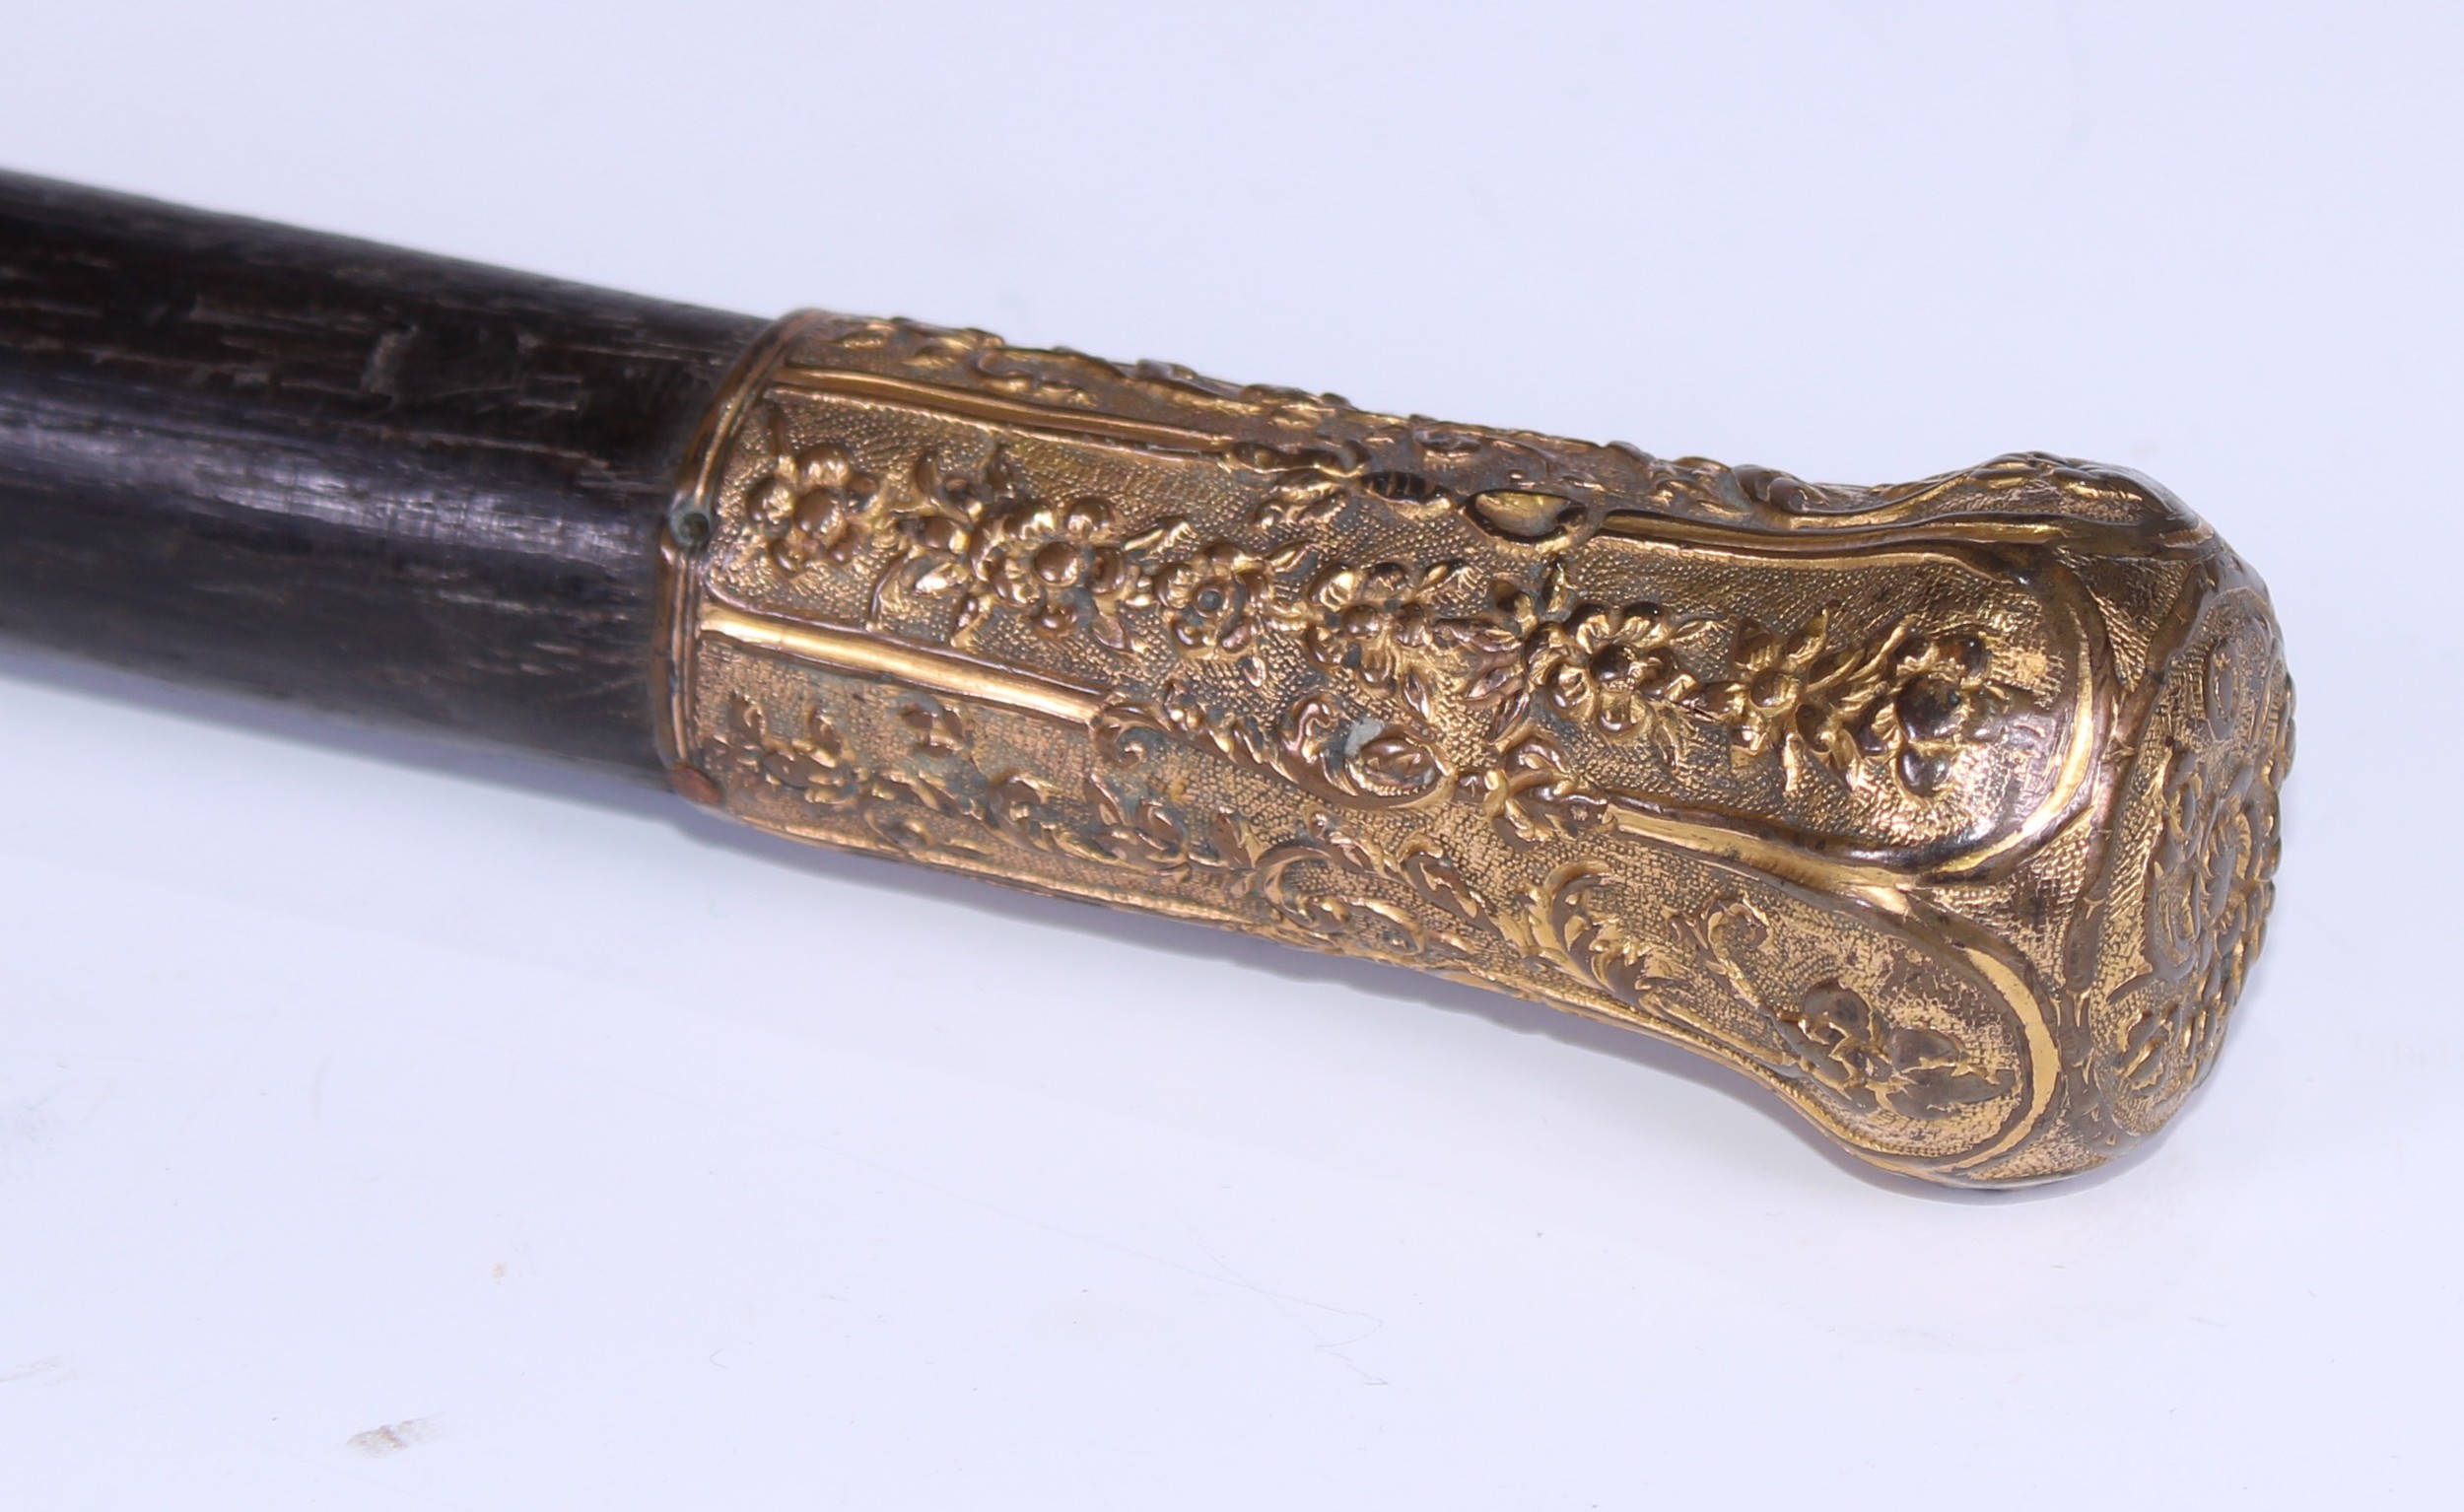 An 18th century gilt metal mounted walking stick, the pommel chased in the Rococo manner with